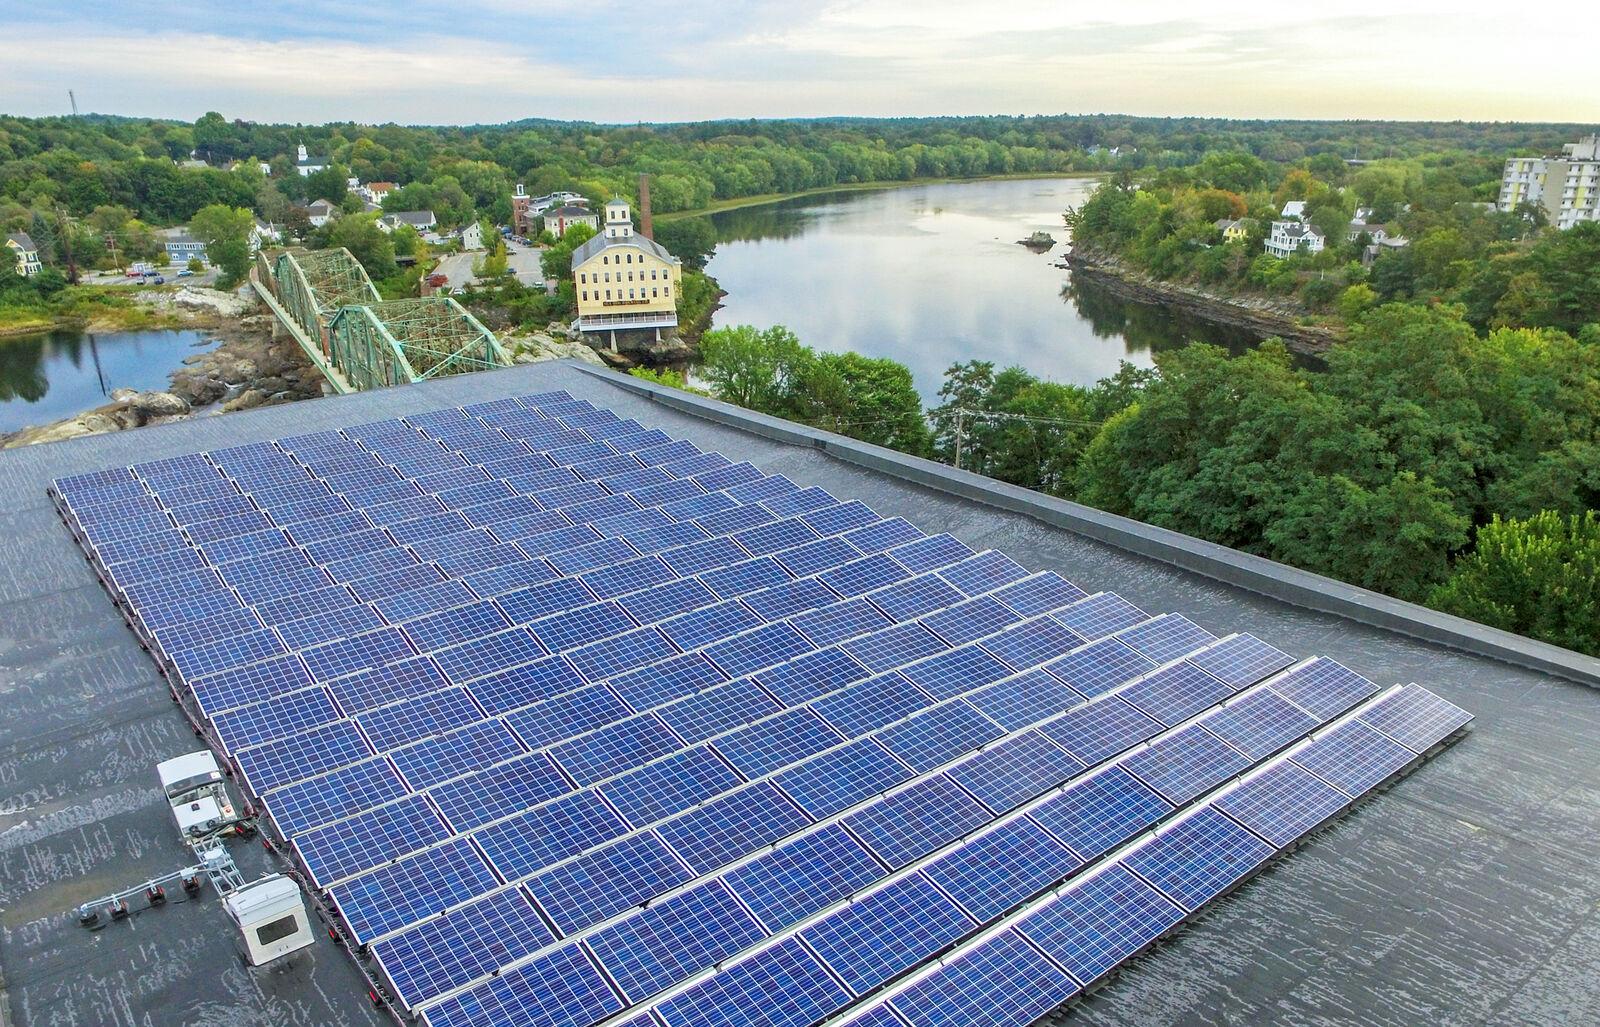 The Nature Conservancy at Waterfront Maine - Brunswick, Maine Solar Project - ReVision Energy